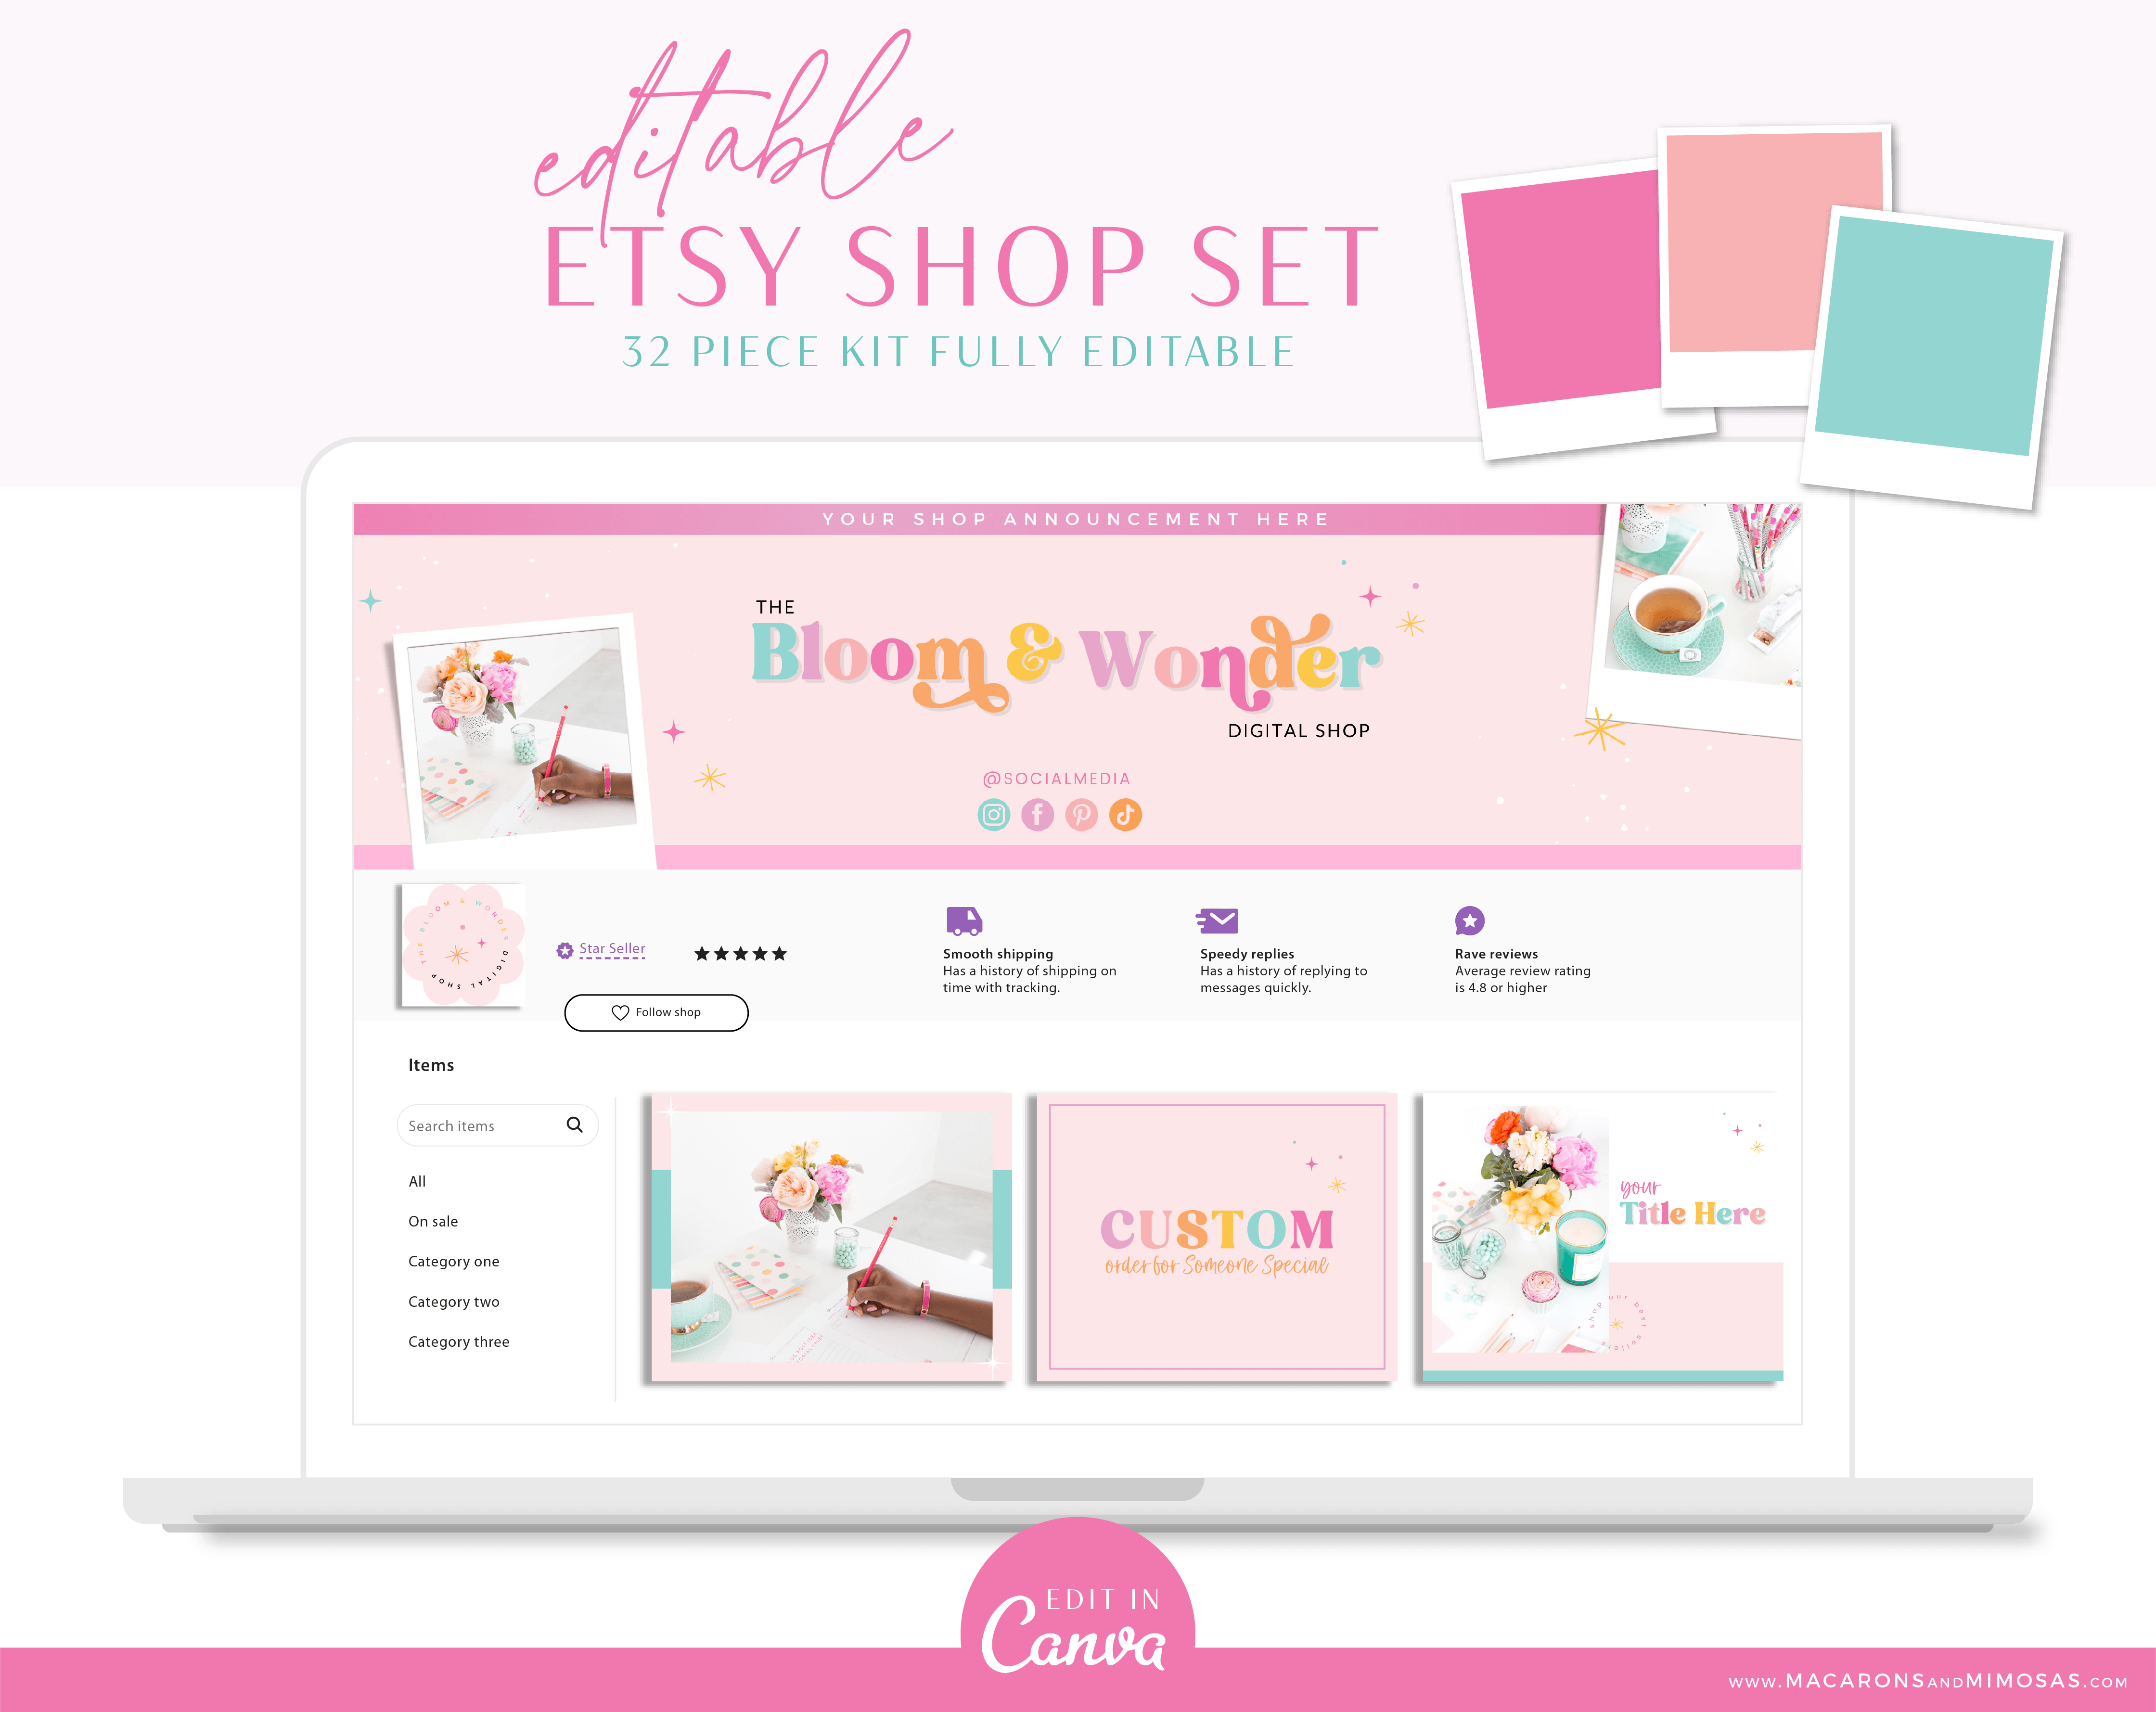 Etsy Shop Banner Branding Kit customizable in Canva, Etsy Seller Sucess Shop Set and Tips, Brand your Etsy Shop Business with Pretty Logos Well... coincidently I have a logo design called "Kayla Nicole" - and the news of the nudes has driven my website traffic up - lol 🤣😂 - No nudes on my site.